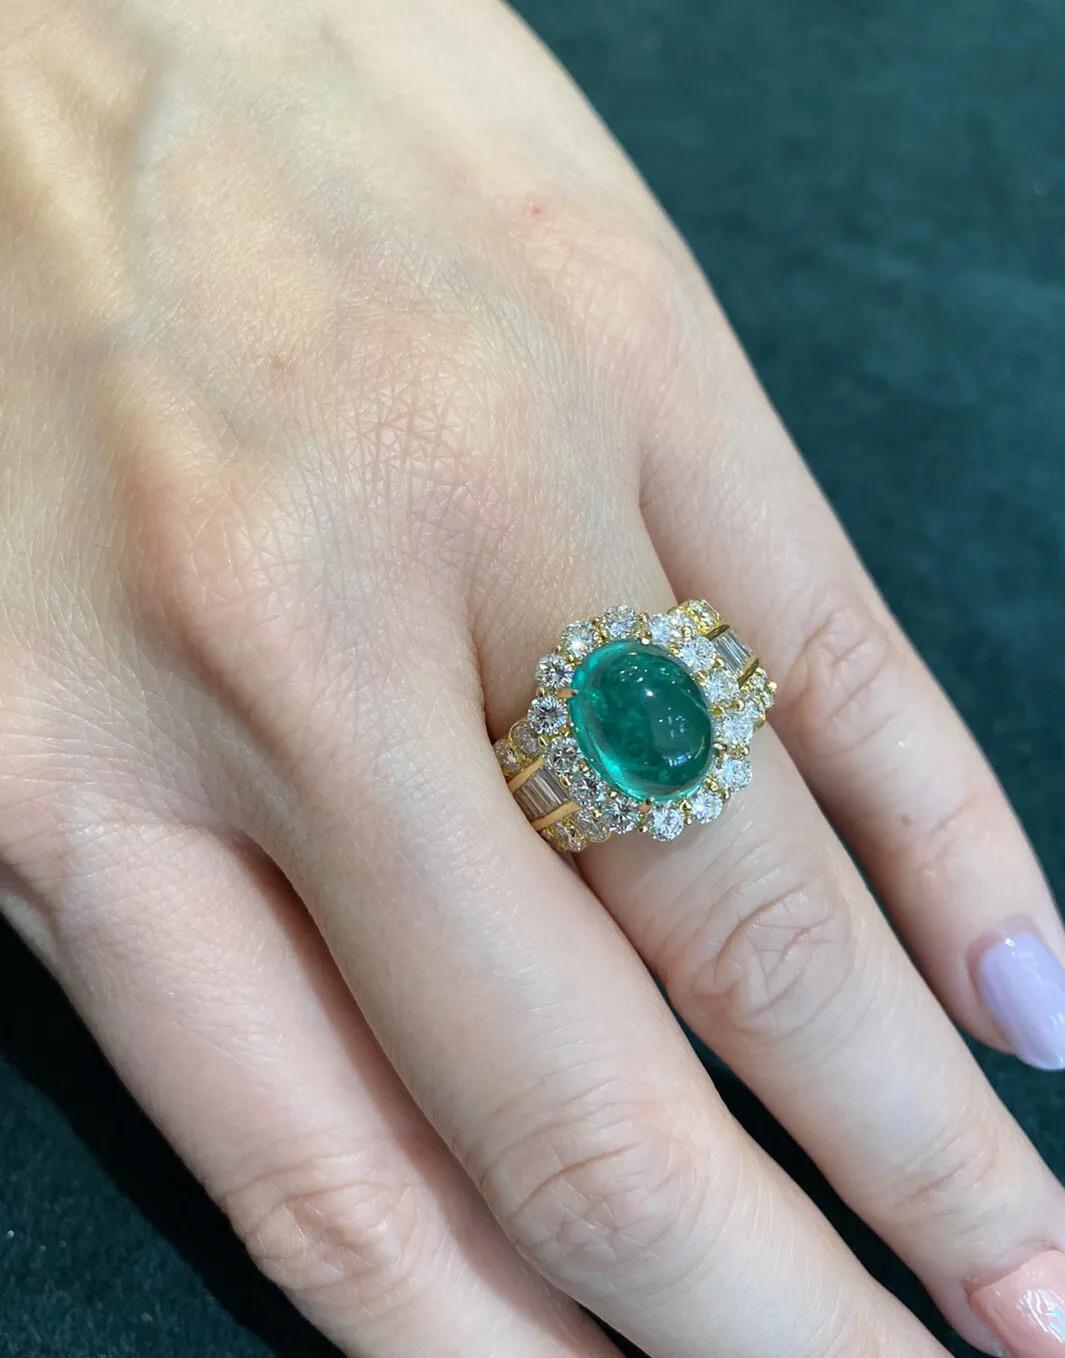 5.12 Carats Emerald Cabochon & Diamond Ring in 18k Yellow Gold

Emerald Cabochon and Diamond Ring features one center Cabochon Emerald accented by Baguettes and Round Brilliant cut Diamonds set in 18k Yellow Gold.

Total emerald weight is 5.12